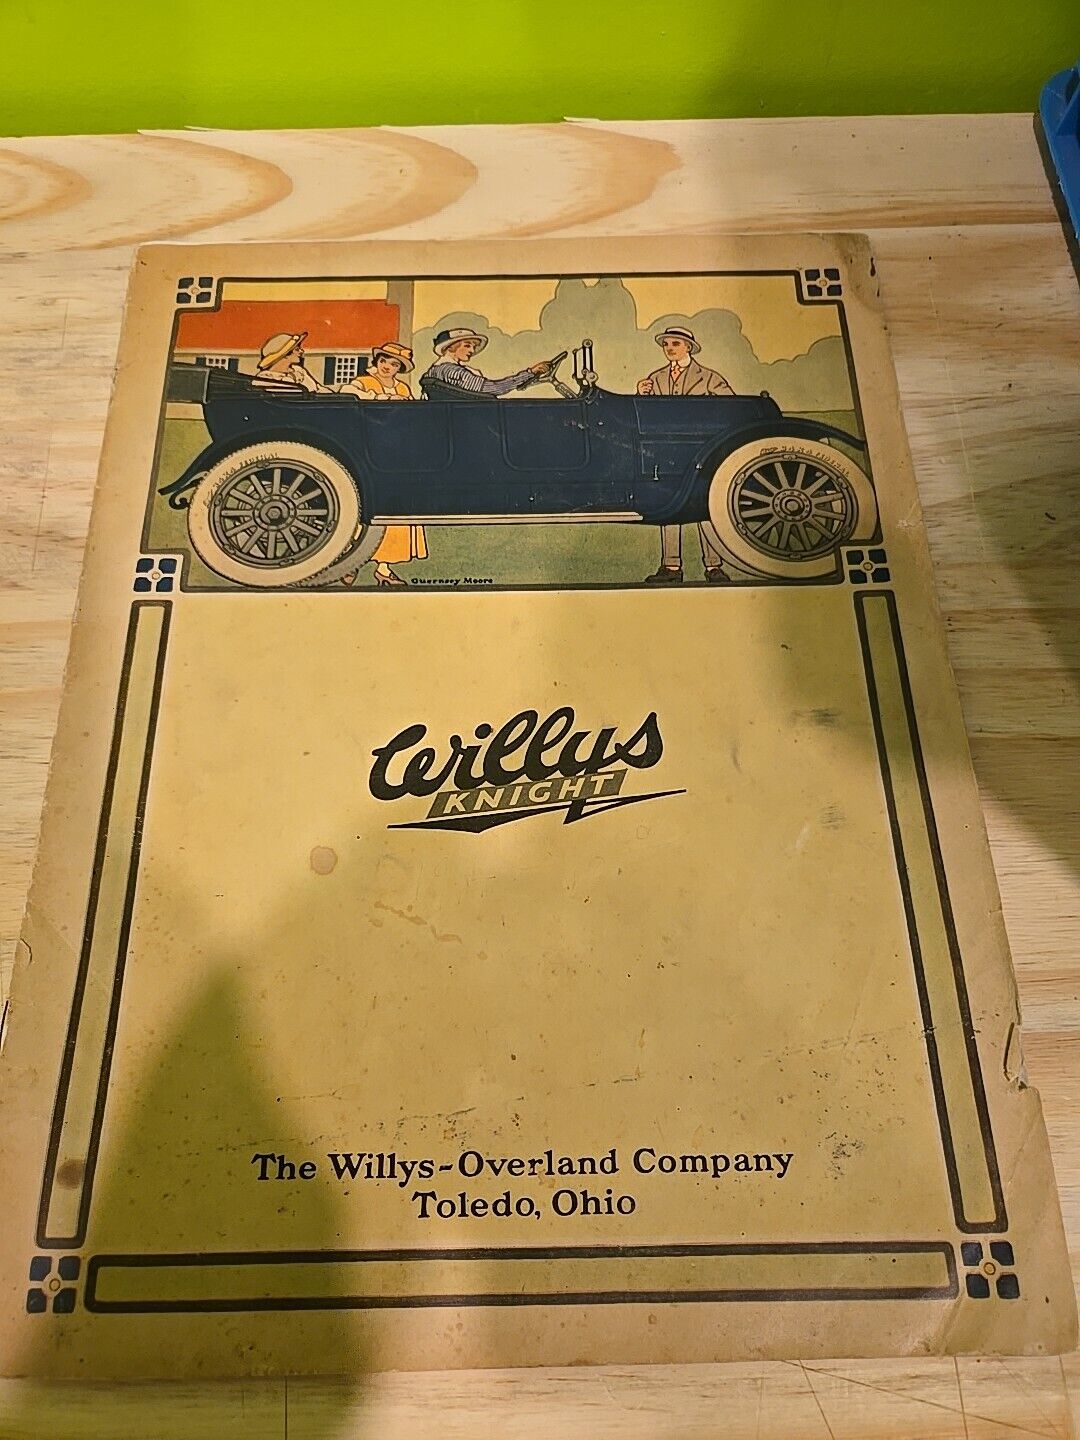 1914 Willys Overland Model 84 Willys Knight - advertising booklet - Toledo Ohio